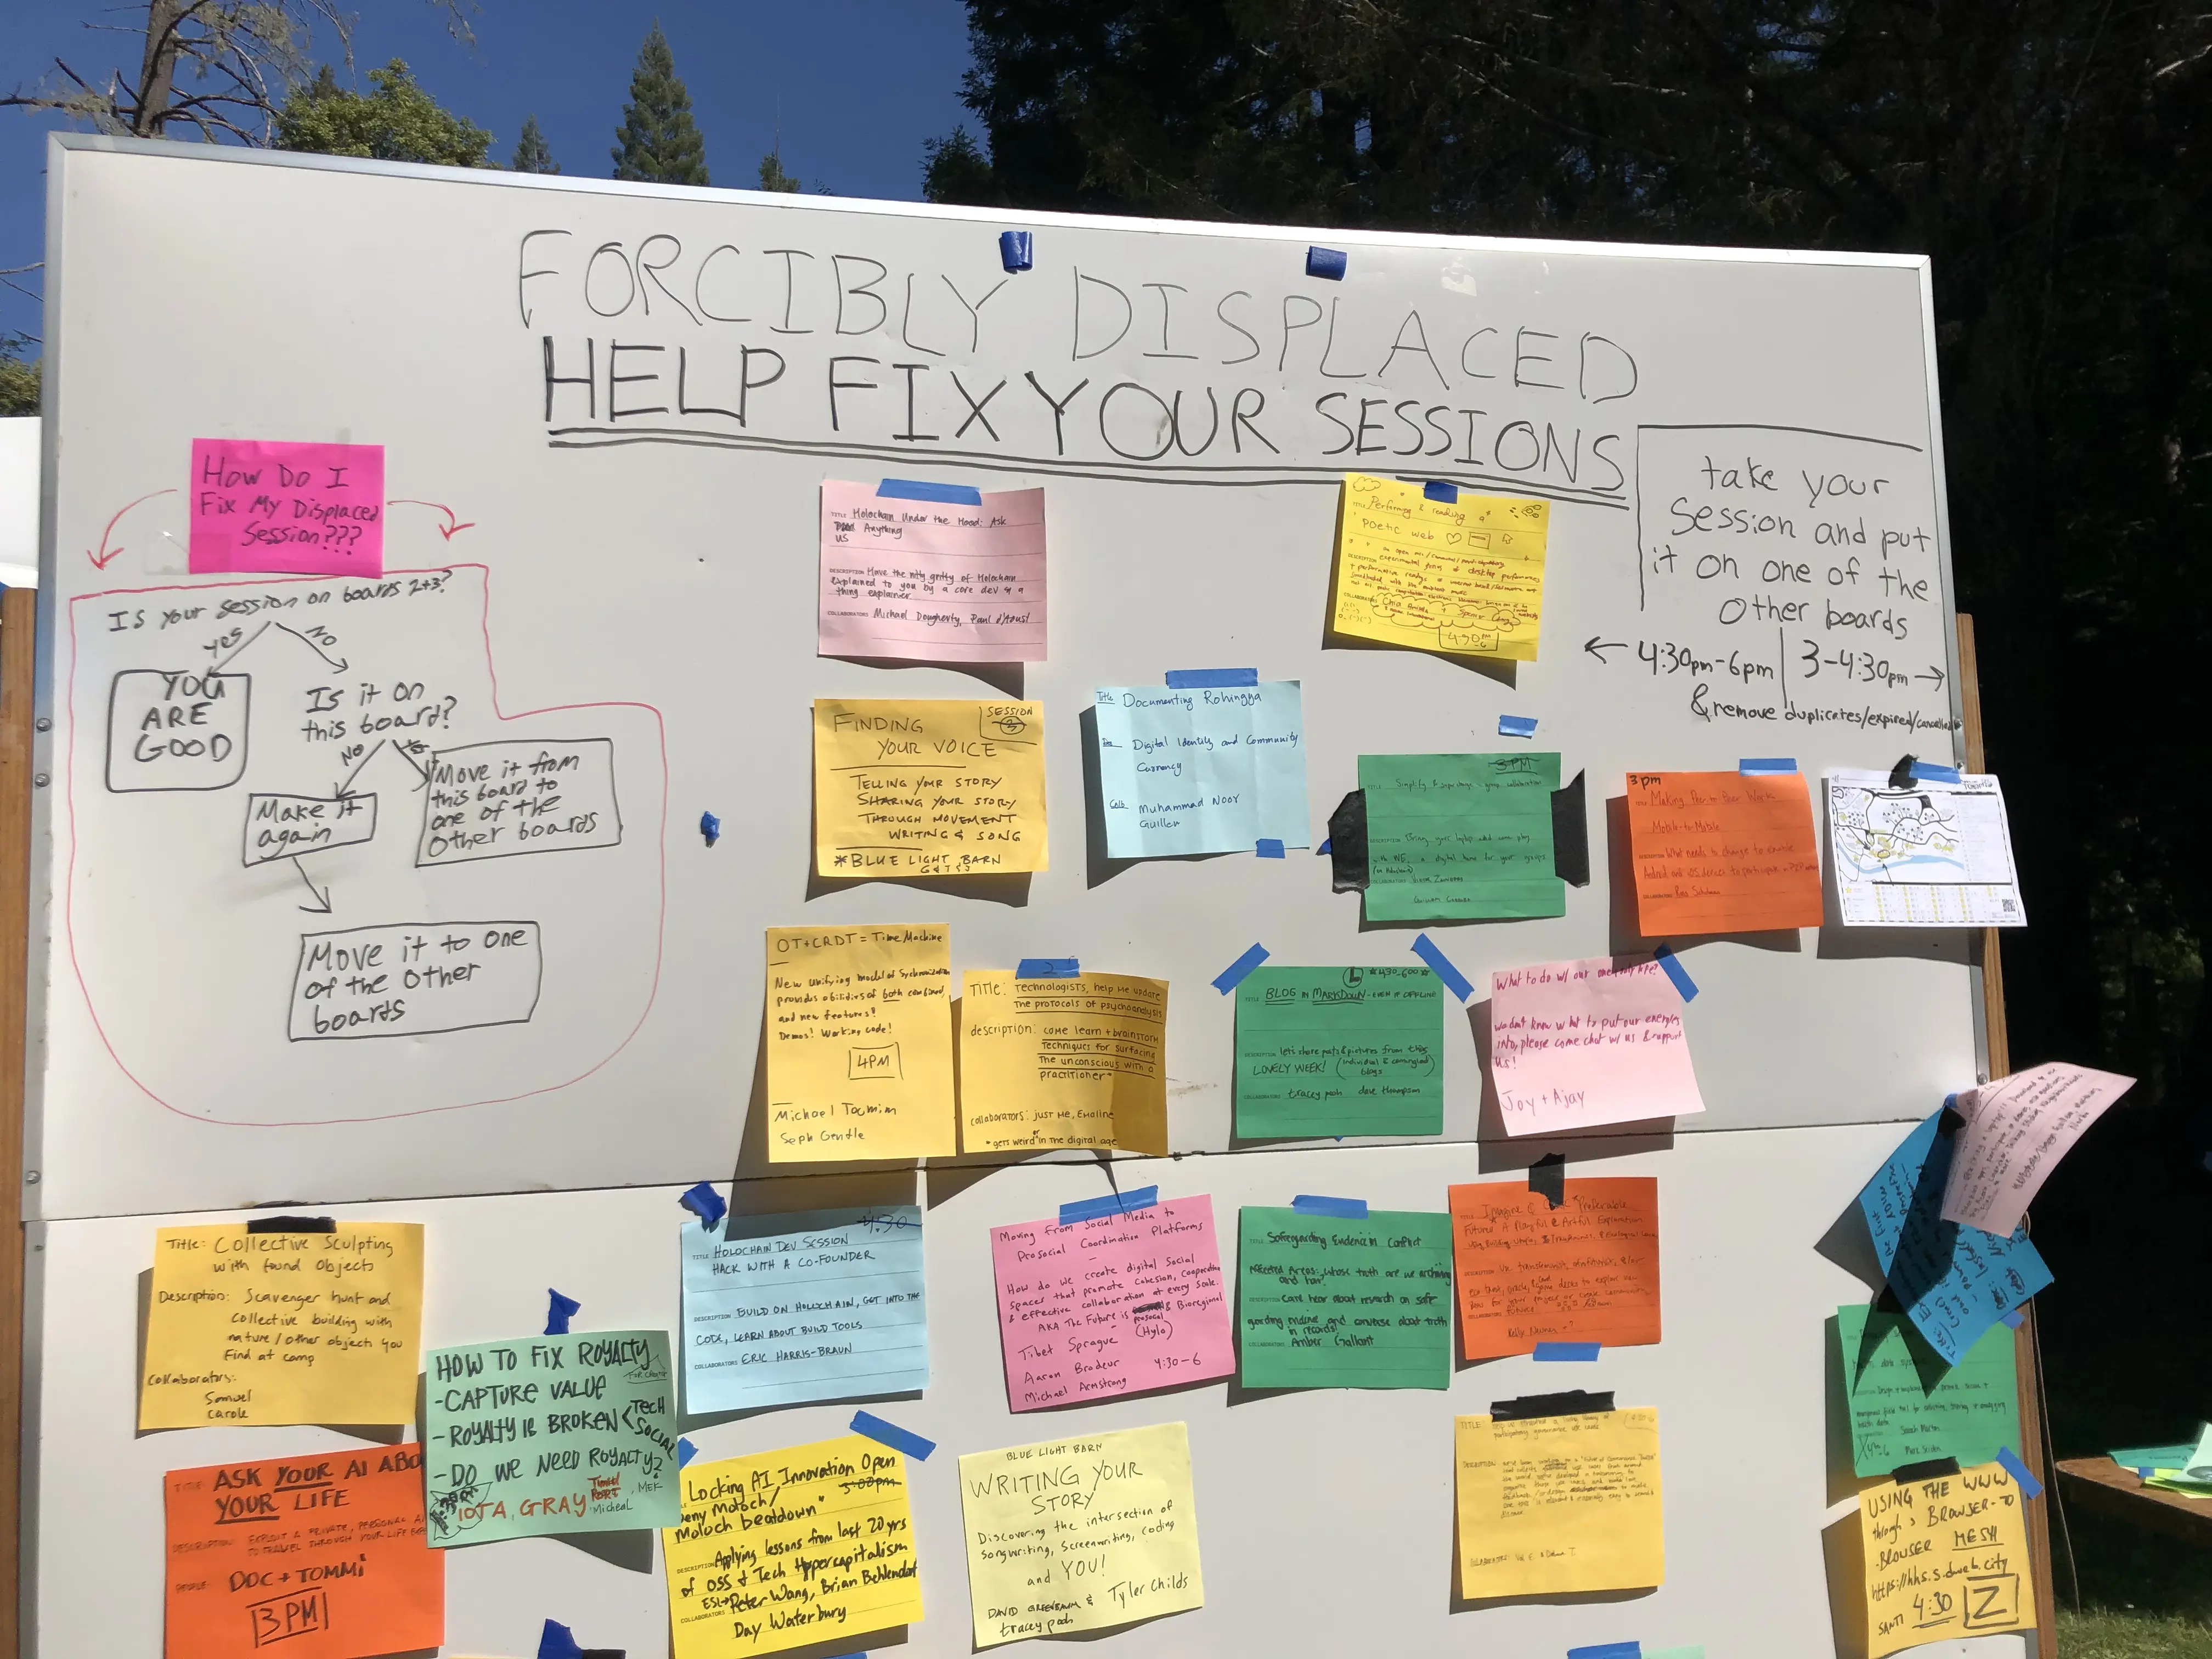 A whiteboard full of post-it under the title 'Forcibly displaced — Help Fix your sessions'